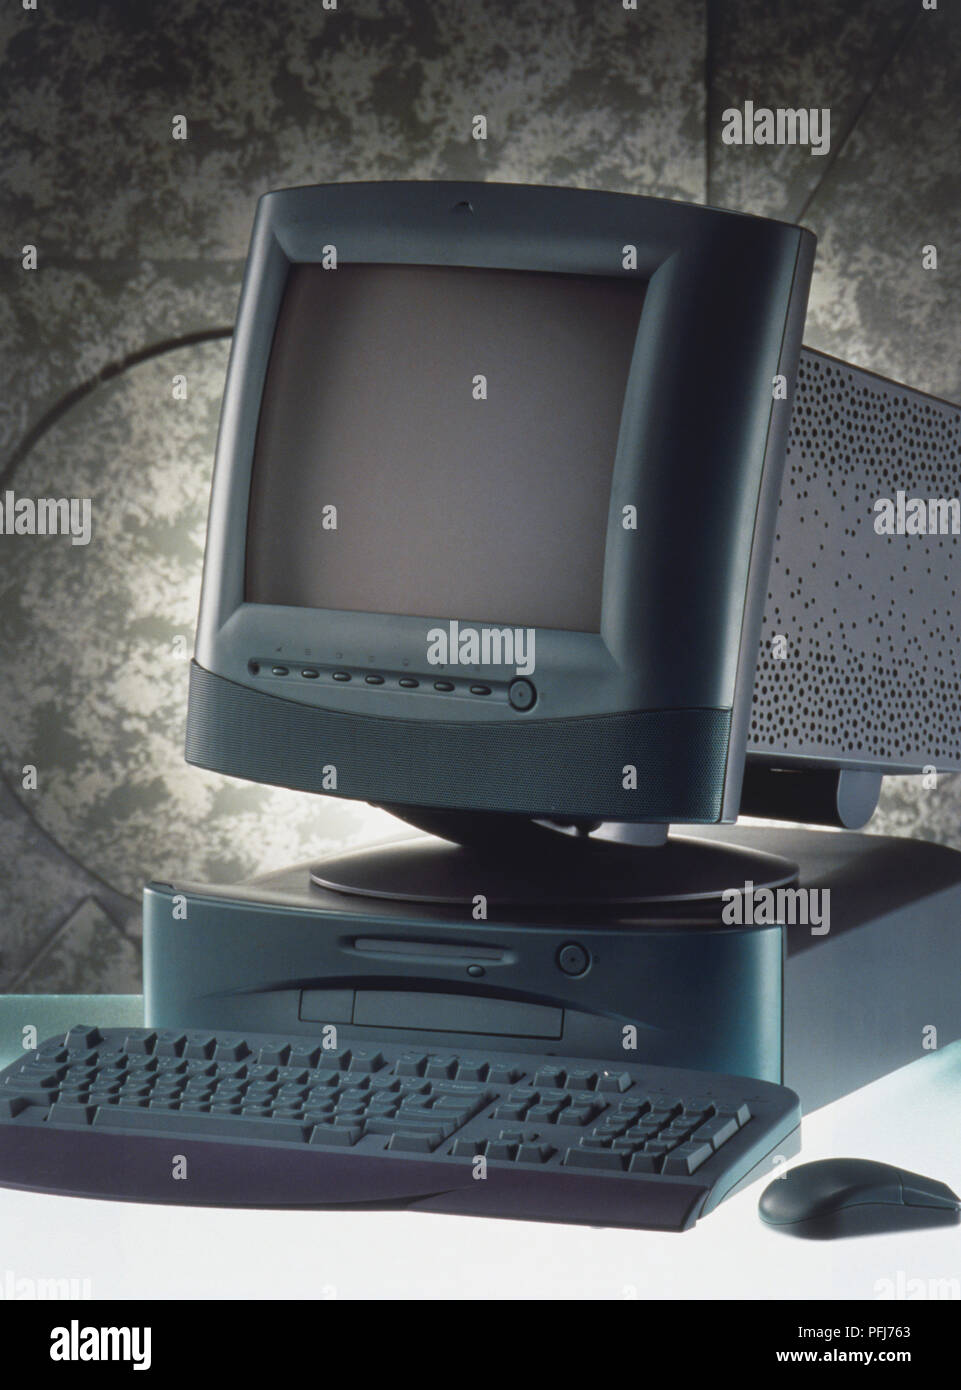 1996 personal computer, front view. Stock Photo